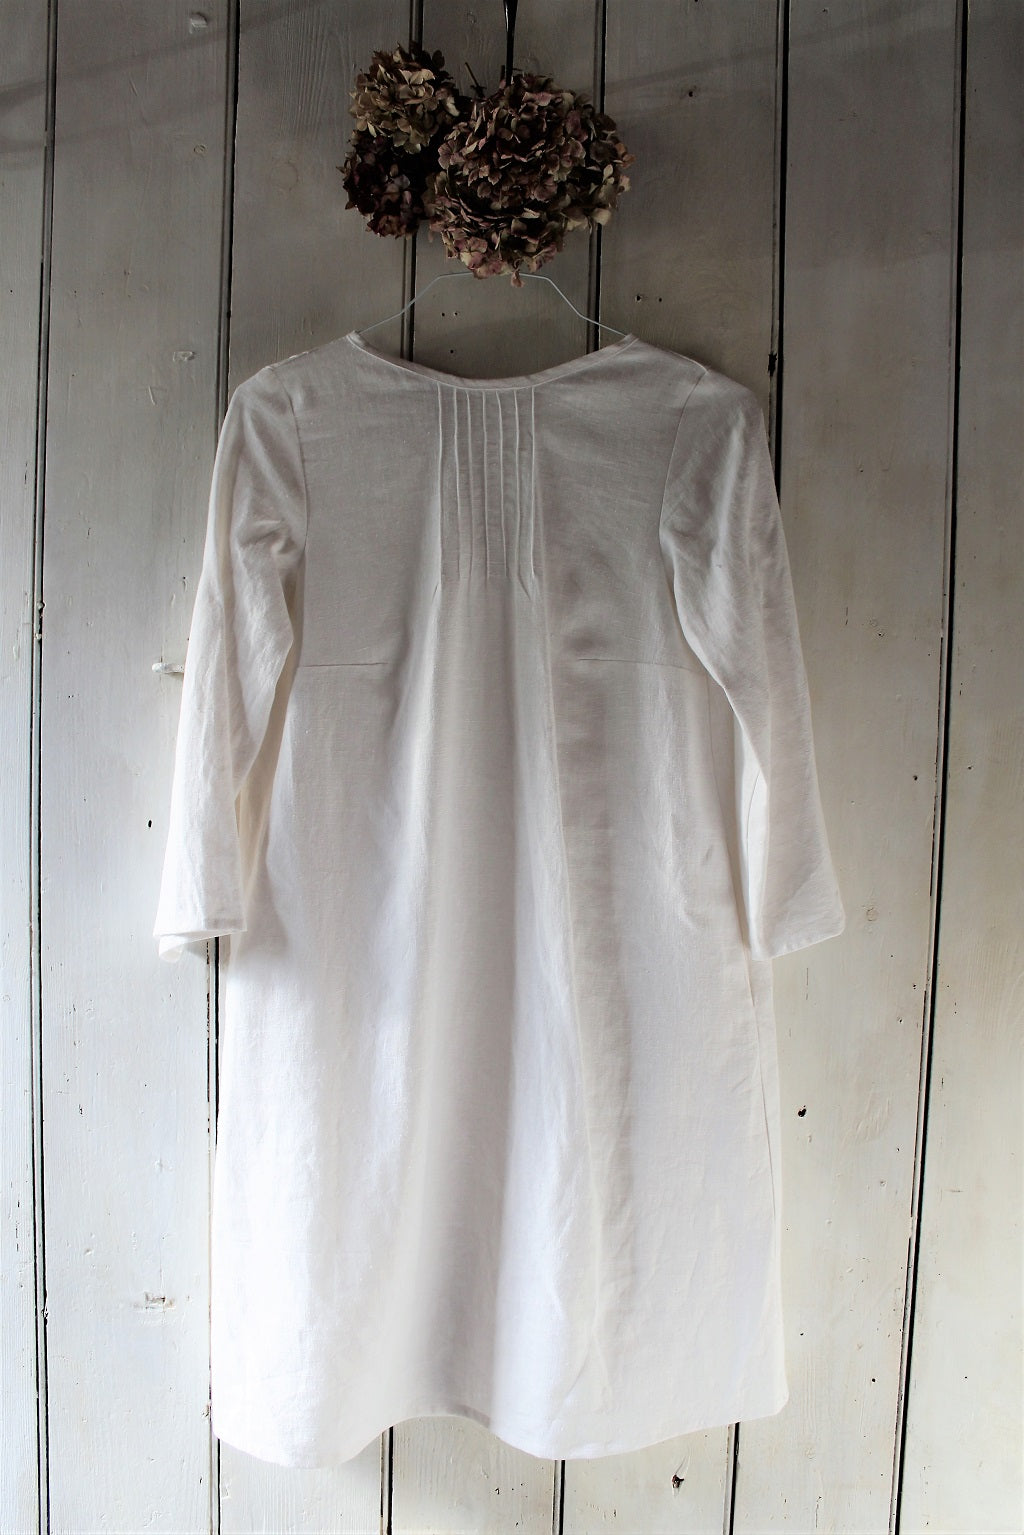 Livia - linen dress with pintucks details and side pockets